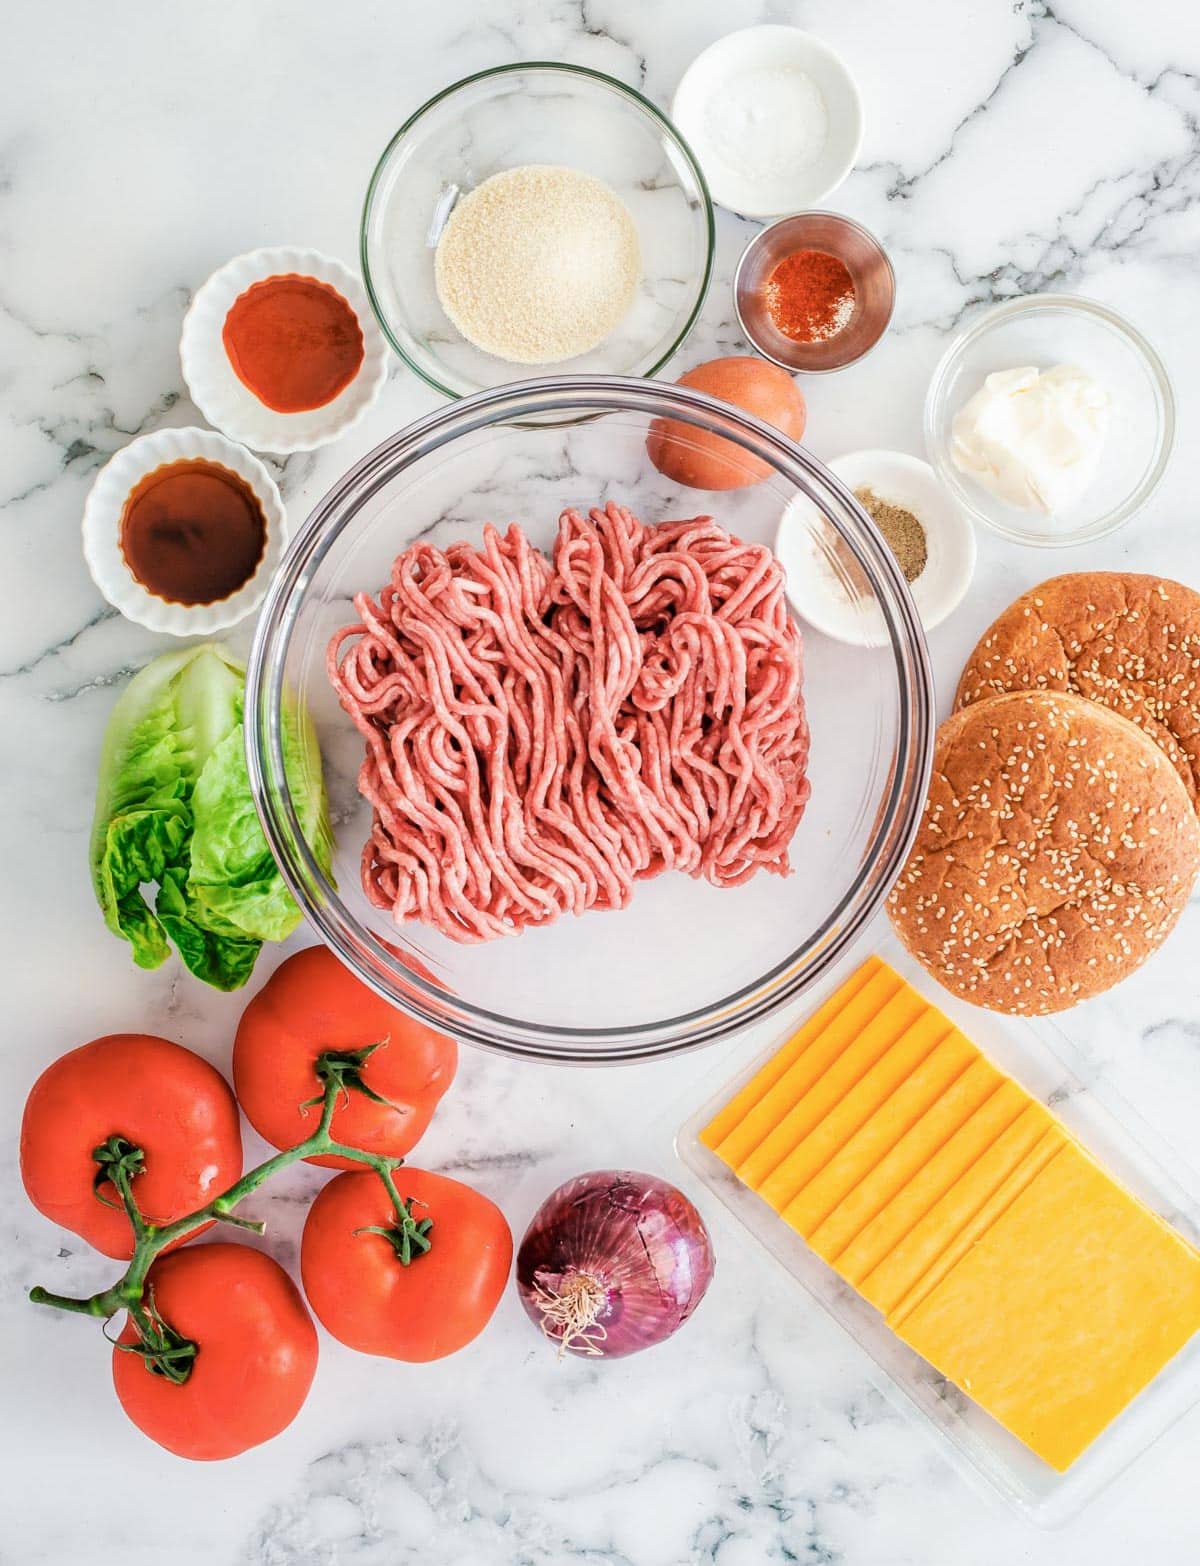 ingredients for air fryer burgers, including buns, ground beef, onion, lettuce, tomato, worcestershire sauce, mayo egg, and bread crumbs